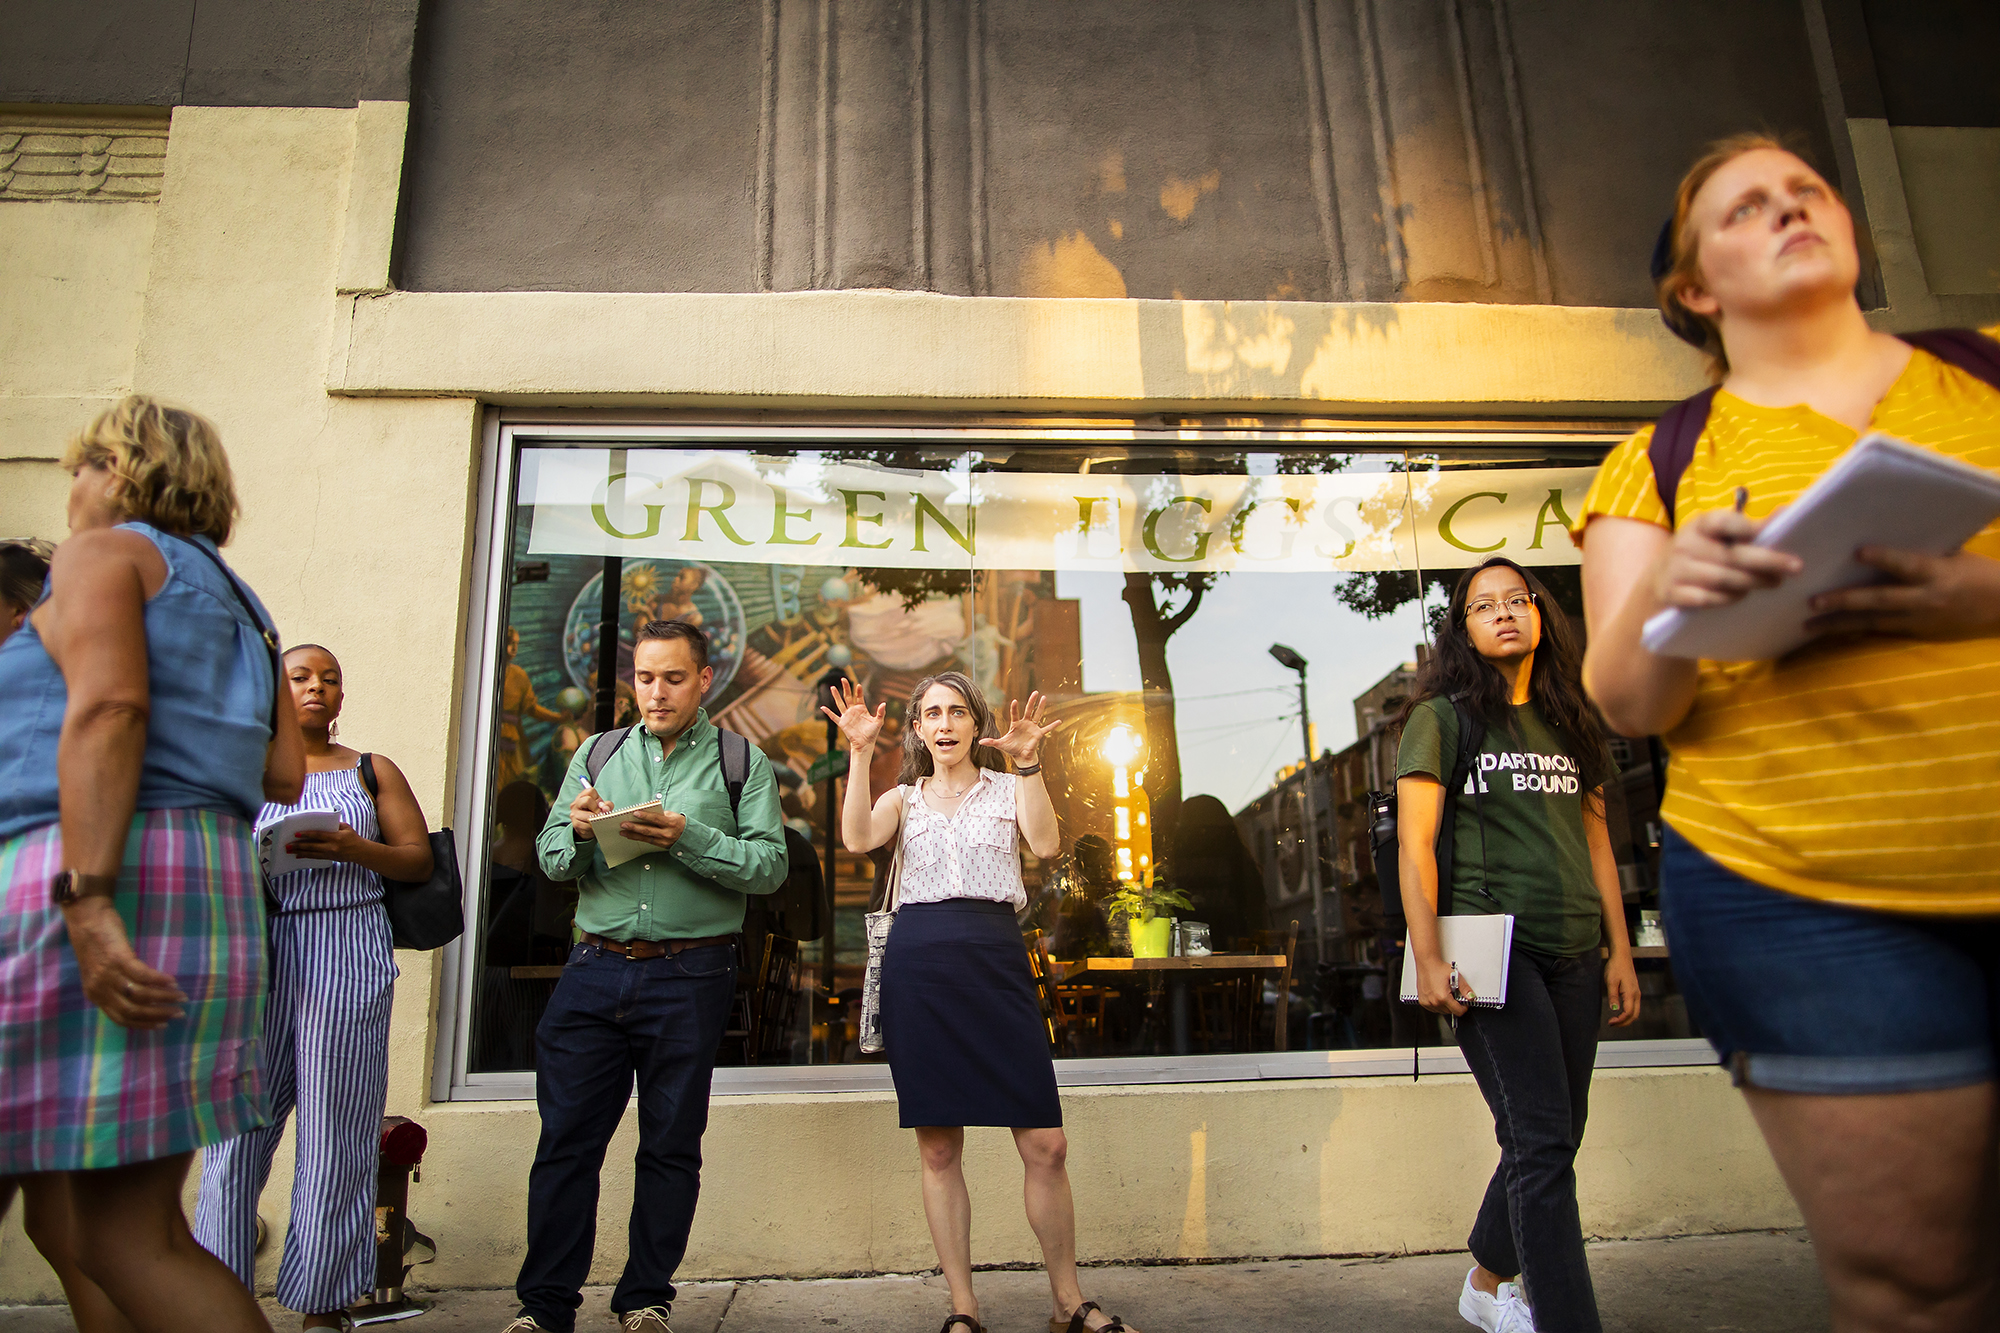 Five people, four with notebooks and one speaking, standing in front of a storefront window reflecting a mural across the street.